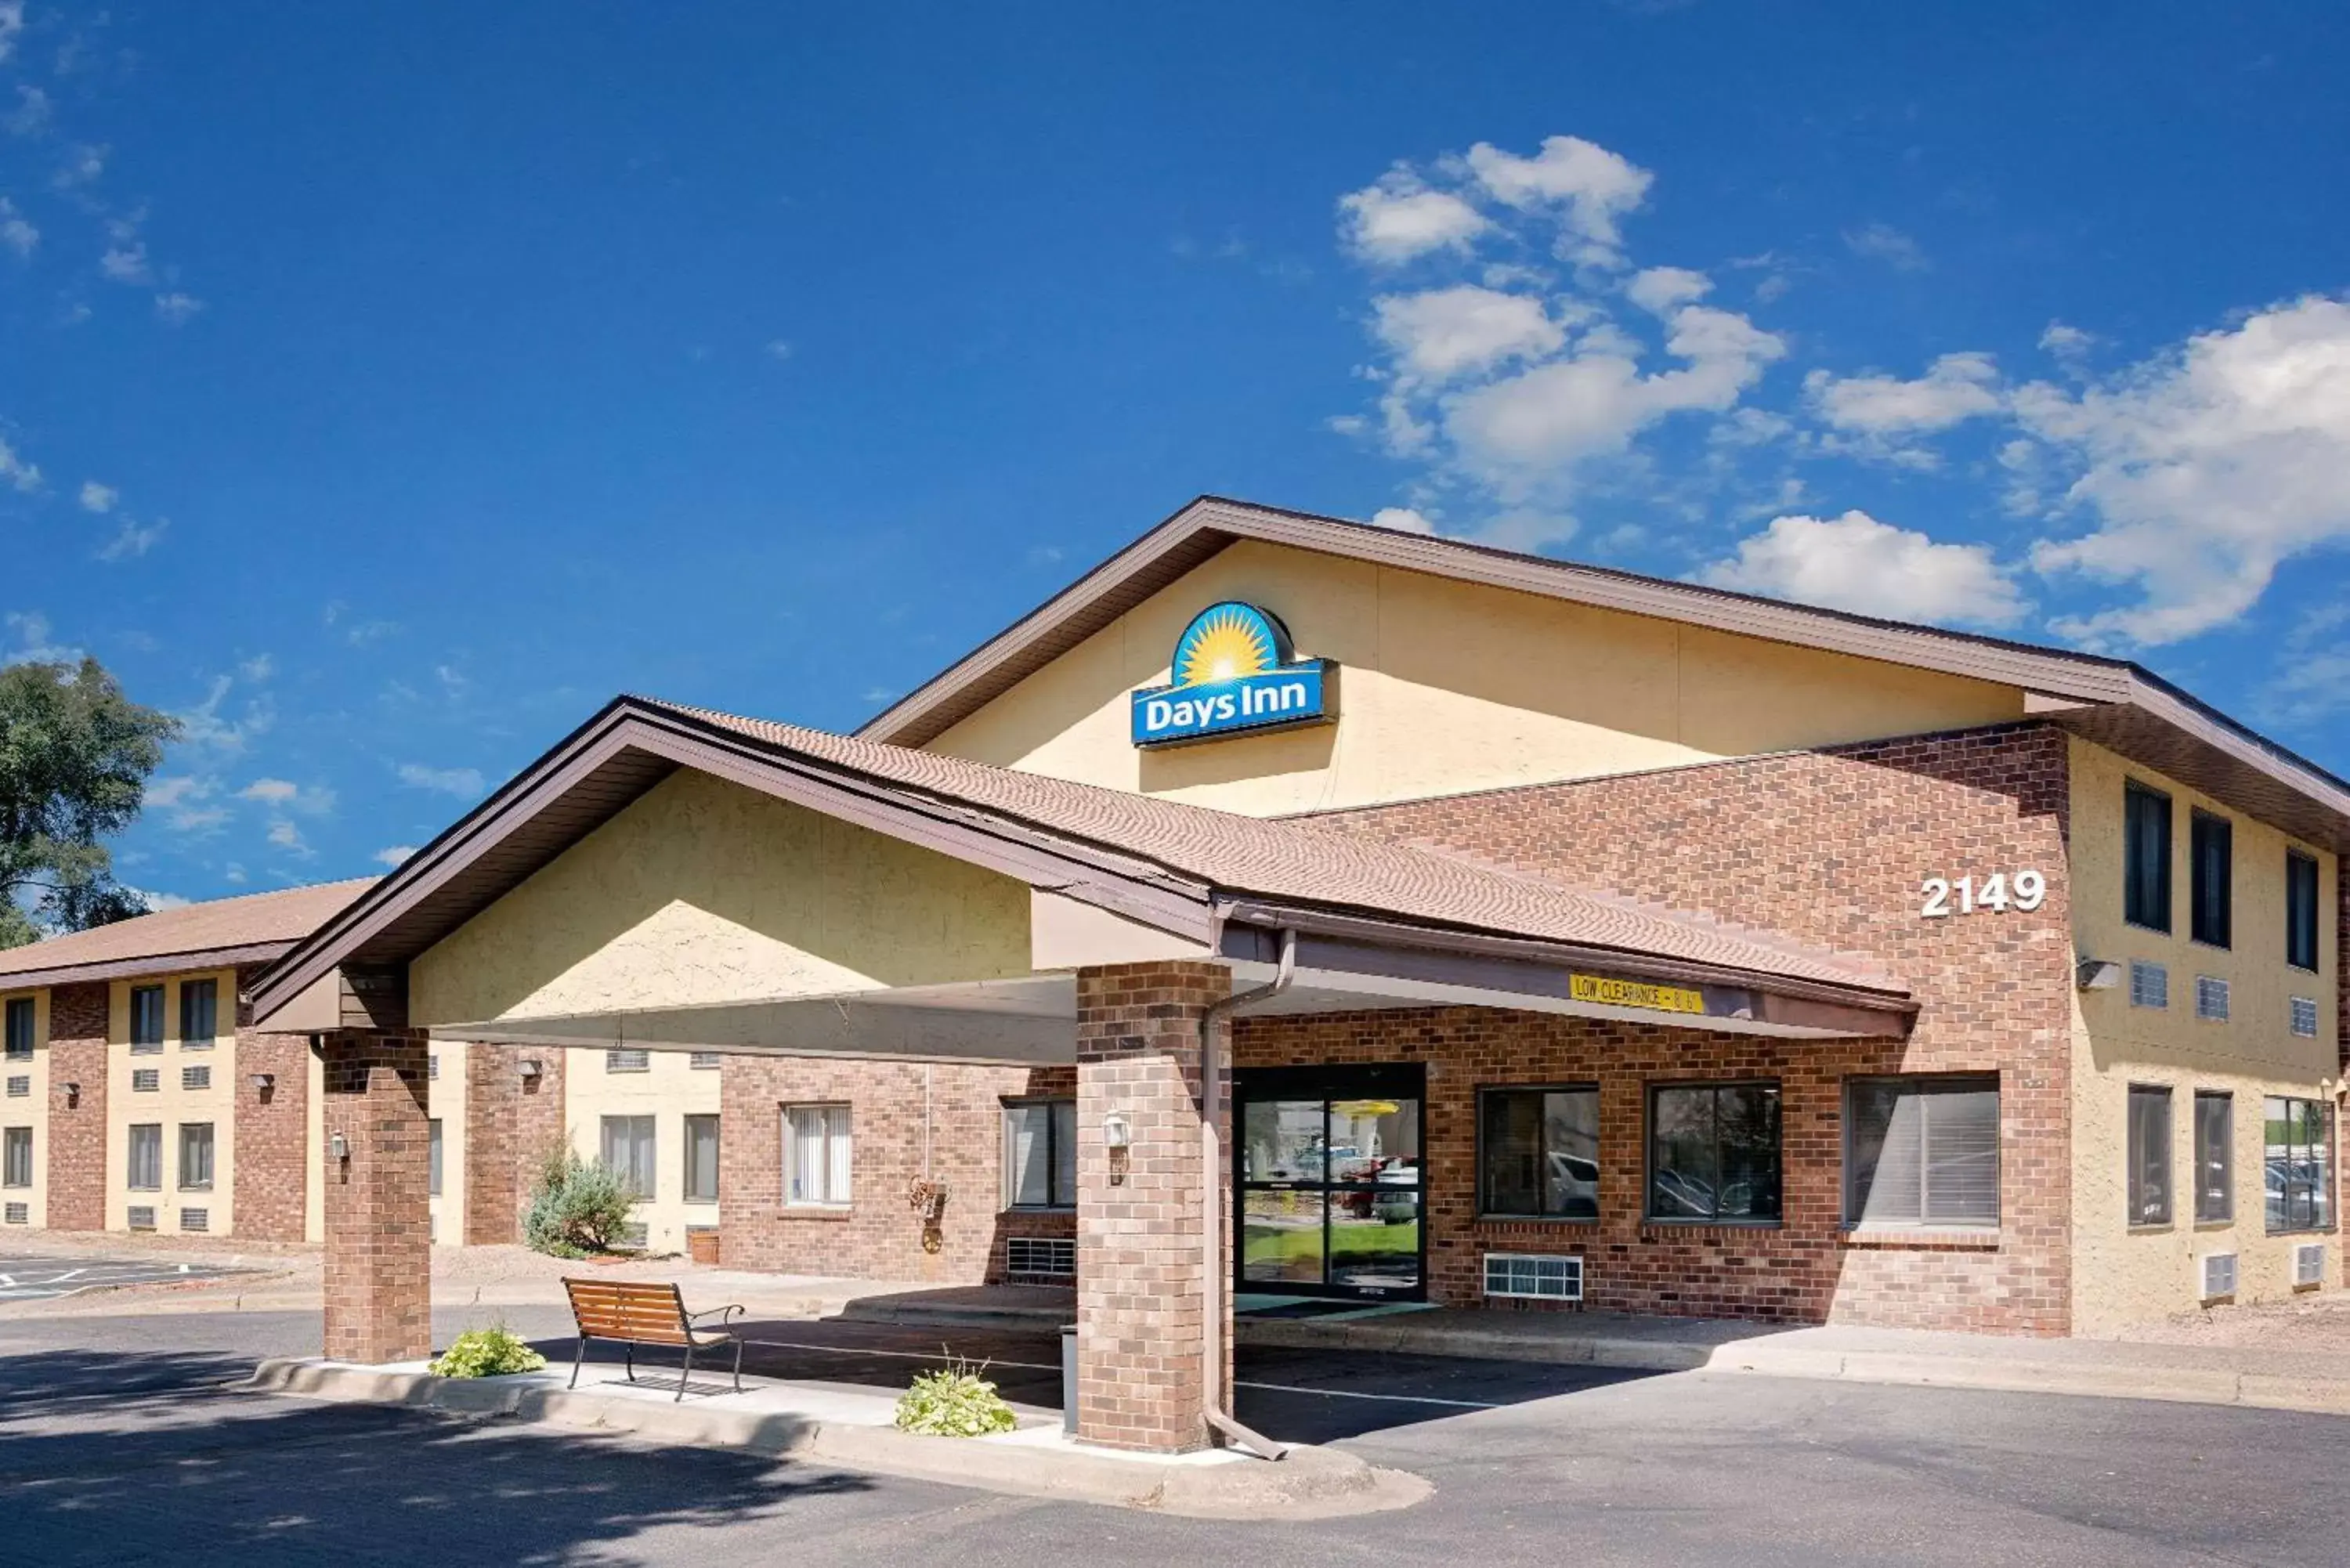 Property building in Days Inn by Wyndham Mounds View Twin Cities North